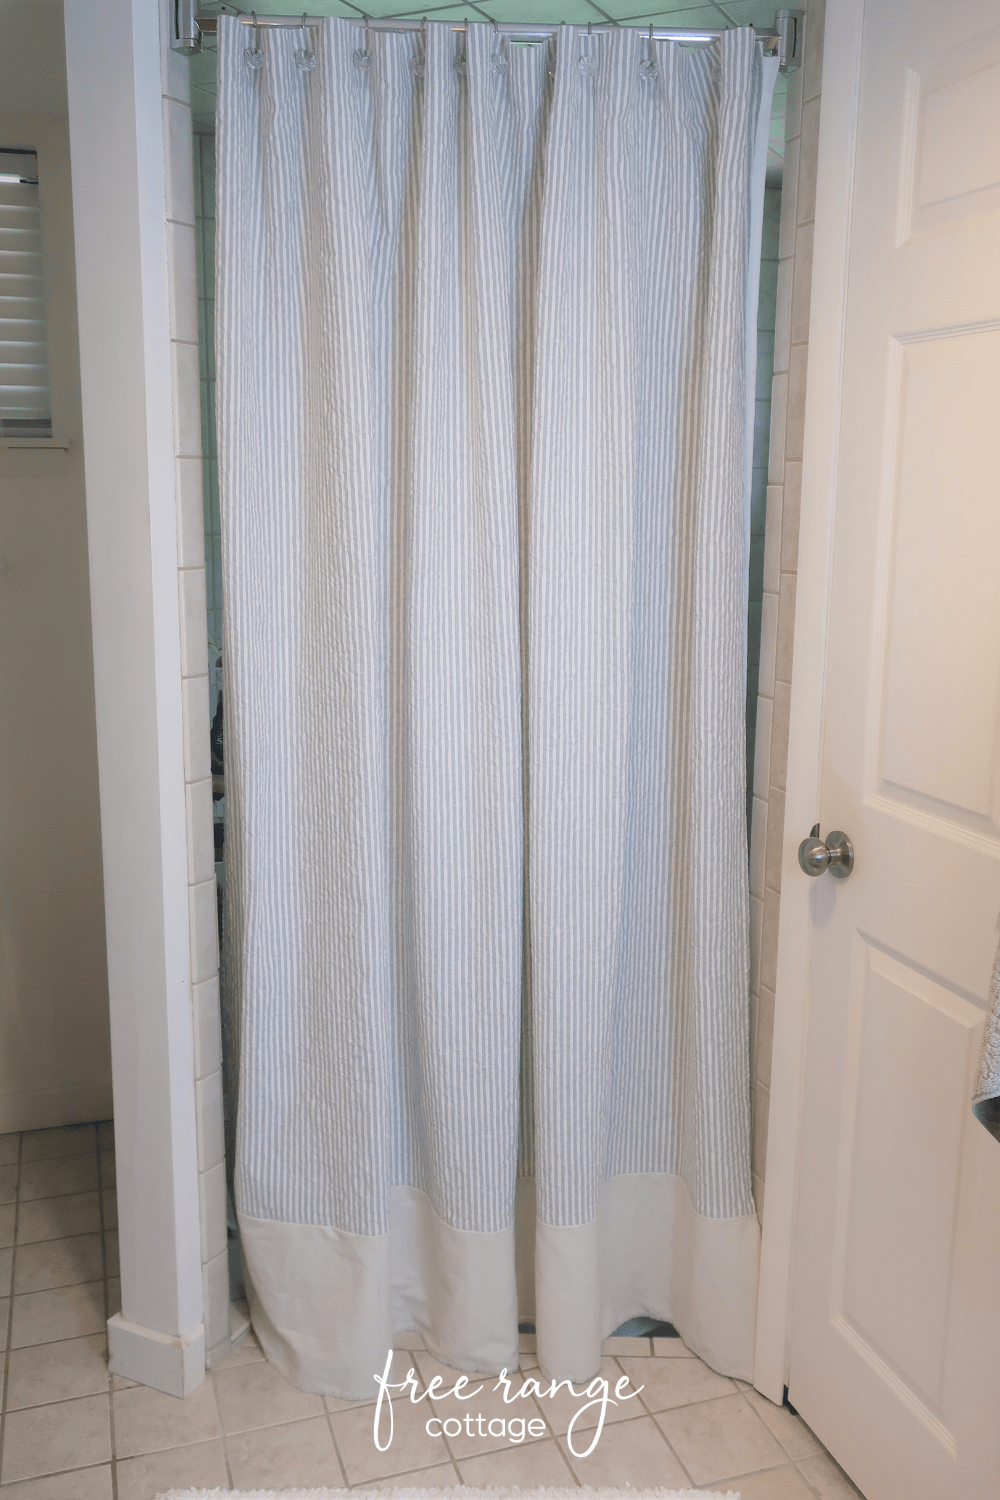 Lengthen A Curtain With Drop Cloth, How To Extend Shower Curtain Length